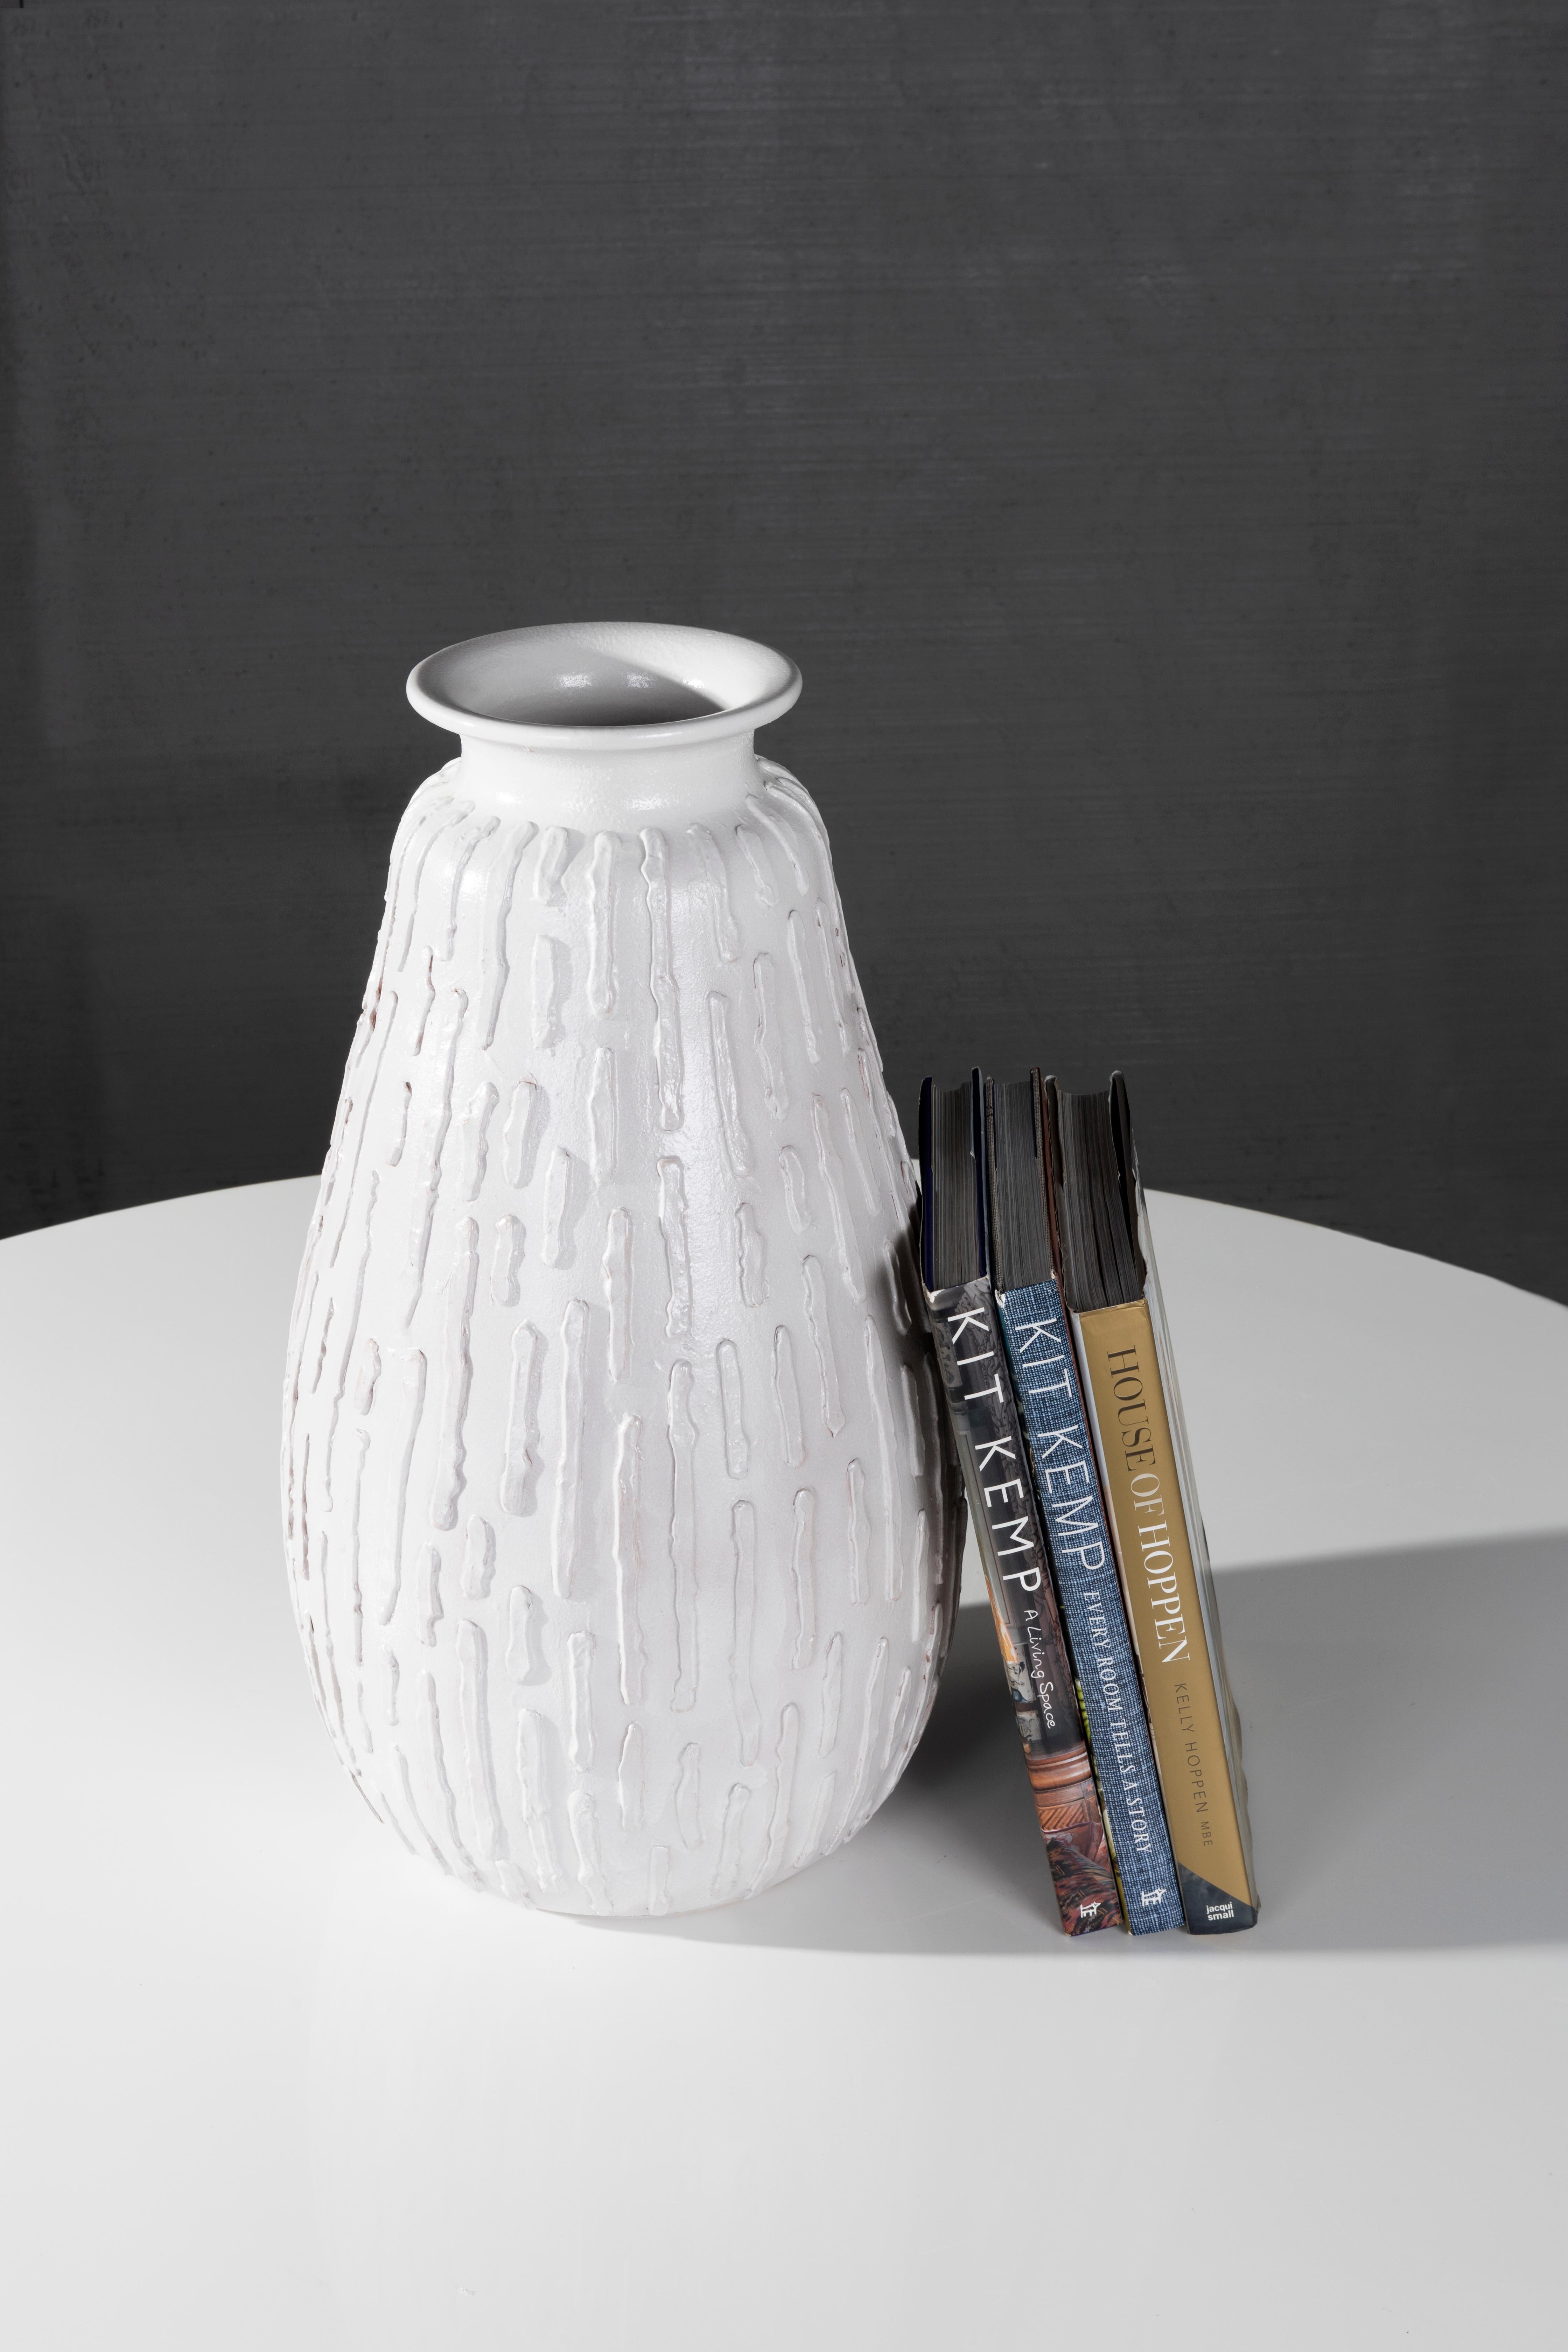 The Ribu Vase, the newest addition to the RENG line, glazed terracotta gourd form vase based off the table lamp which shares its name sake.

All pieces from the RENG line are designed in Dallas, Texas by Brendan Bass. Then a small team of select